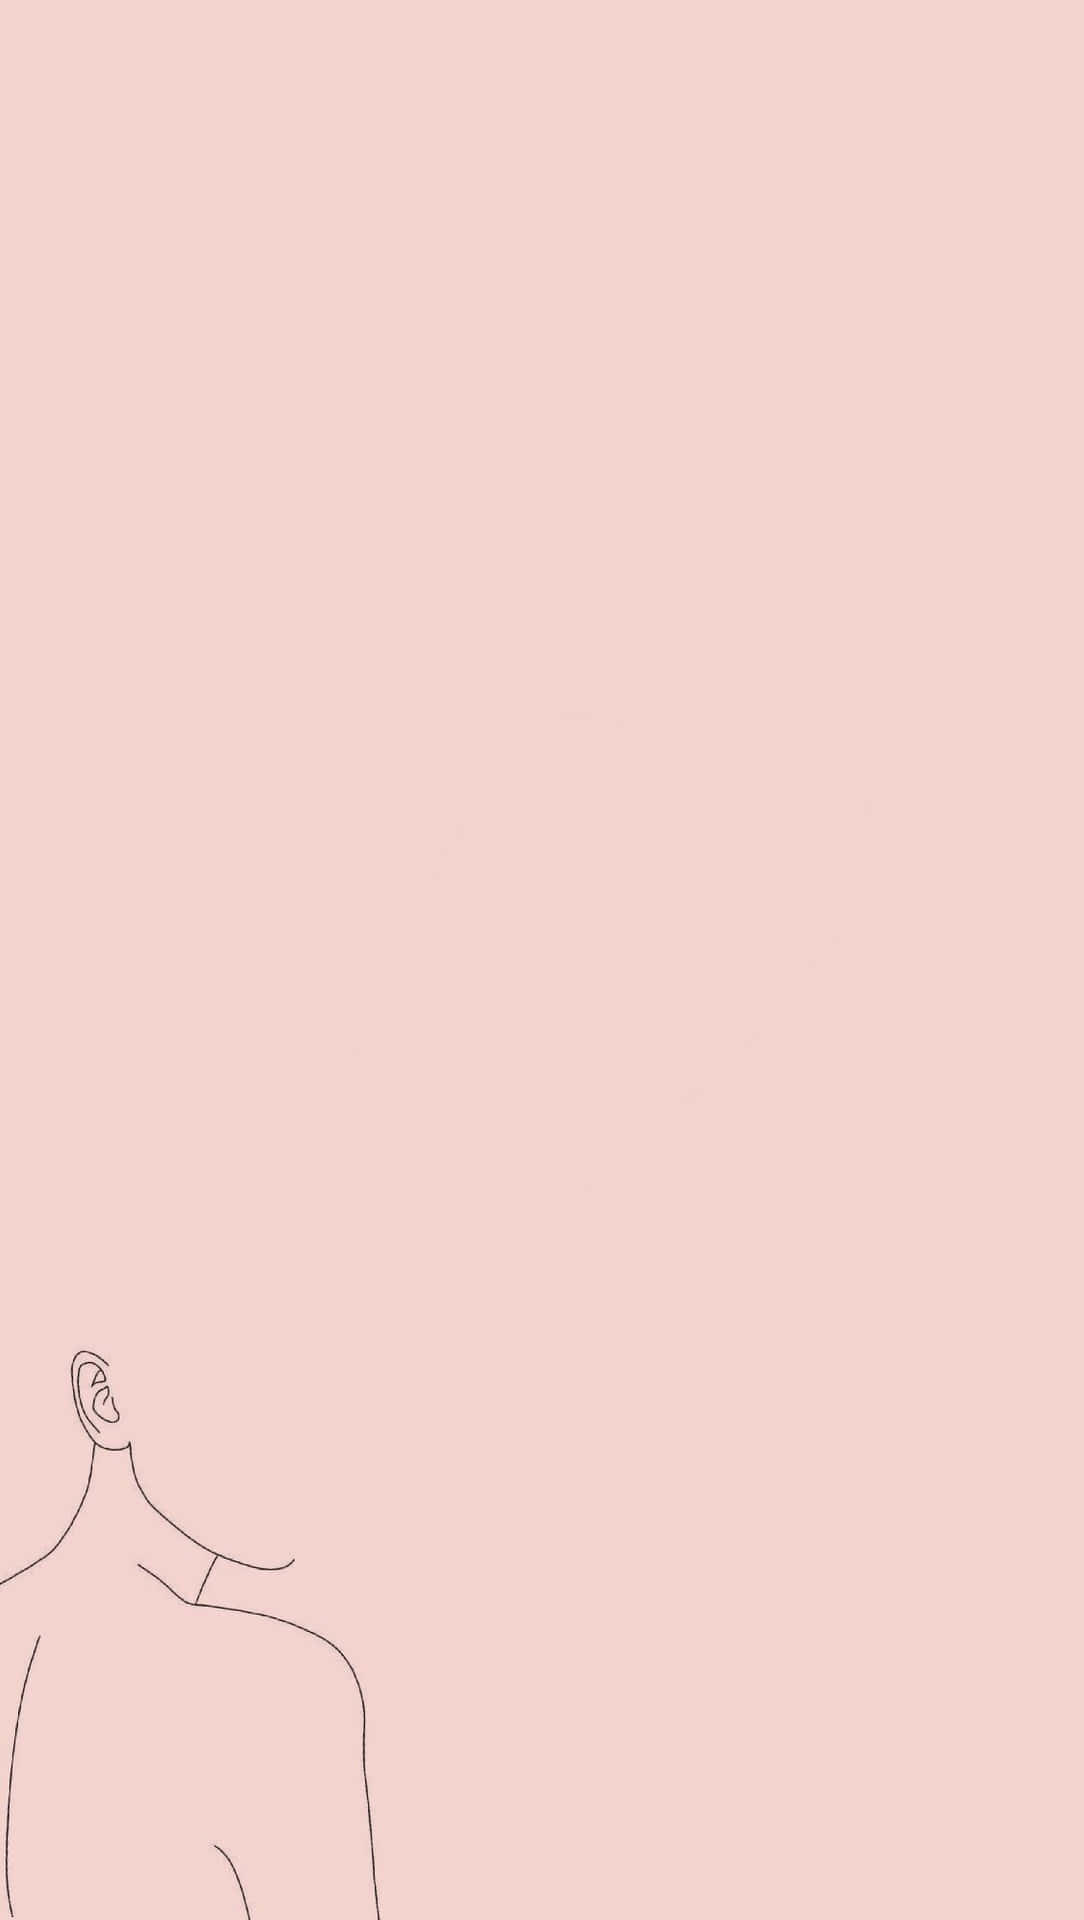 Add a touch of fun with this pink-hued Minimalist wallpaper! Wallpaper